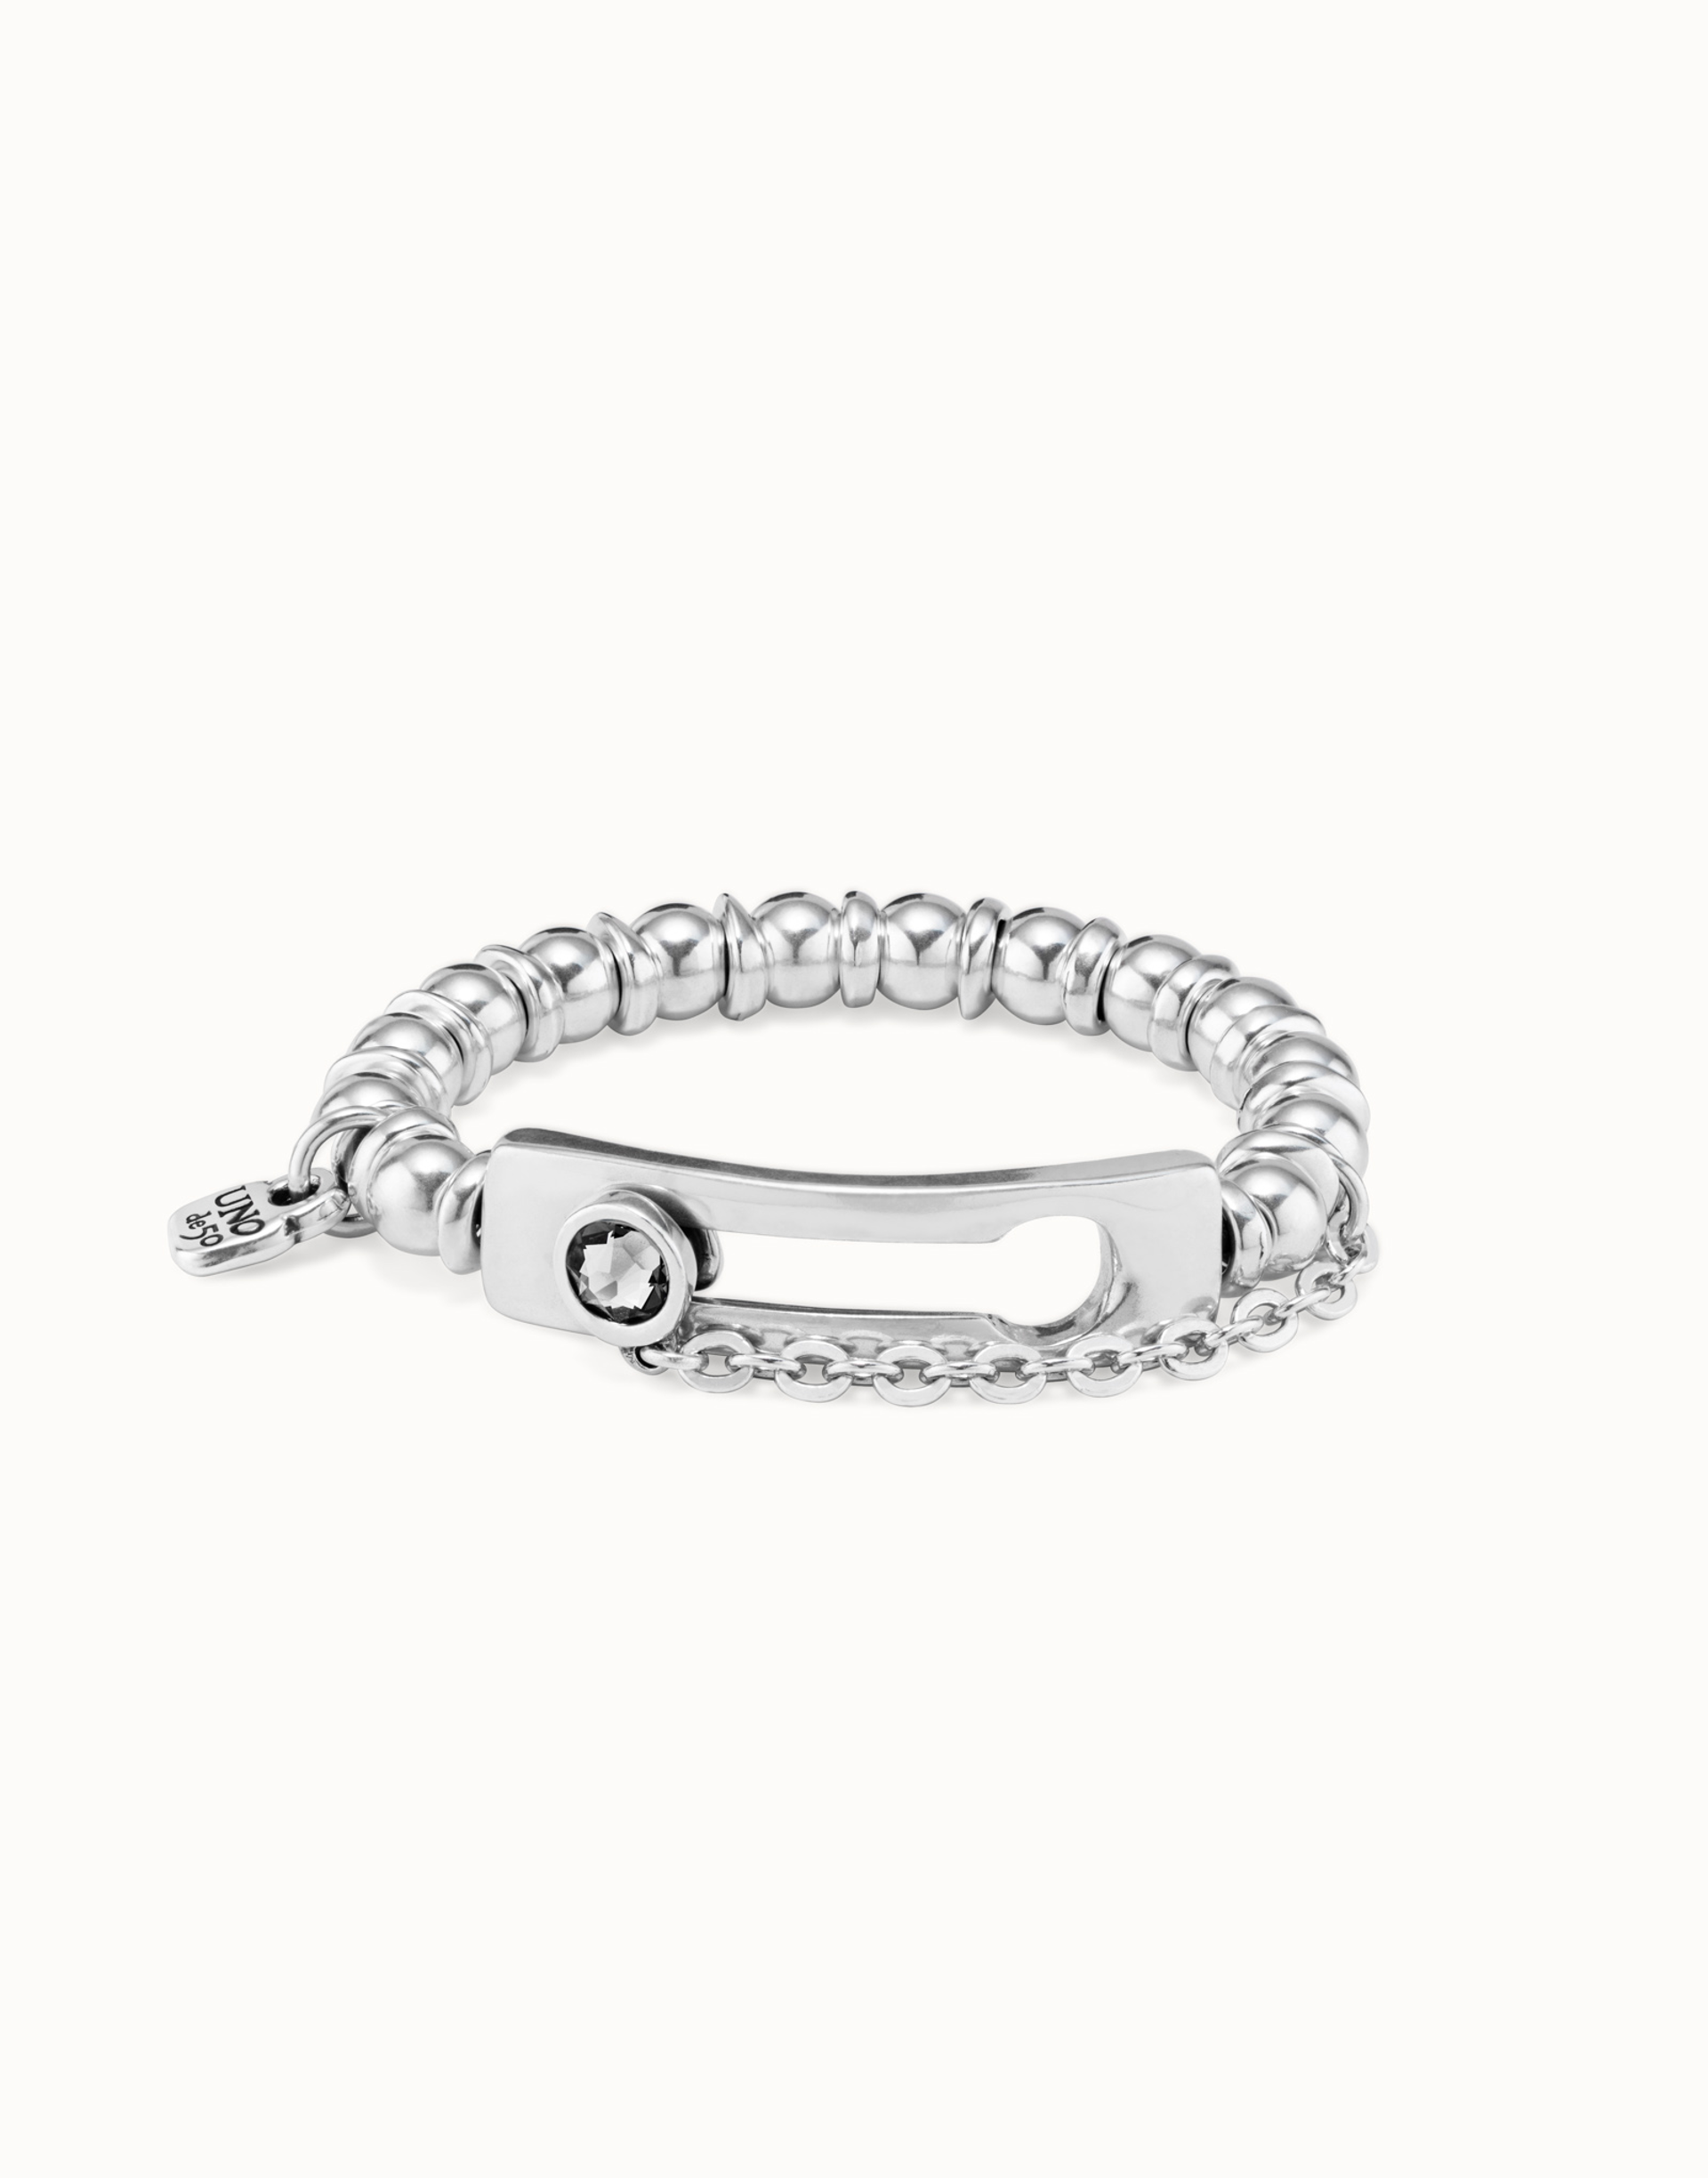 Empower Bracelet with Unode50 Charm and Crystal by UNO DE 50